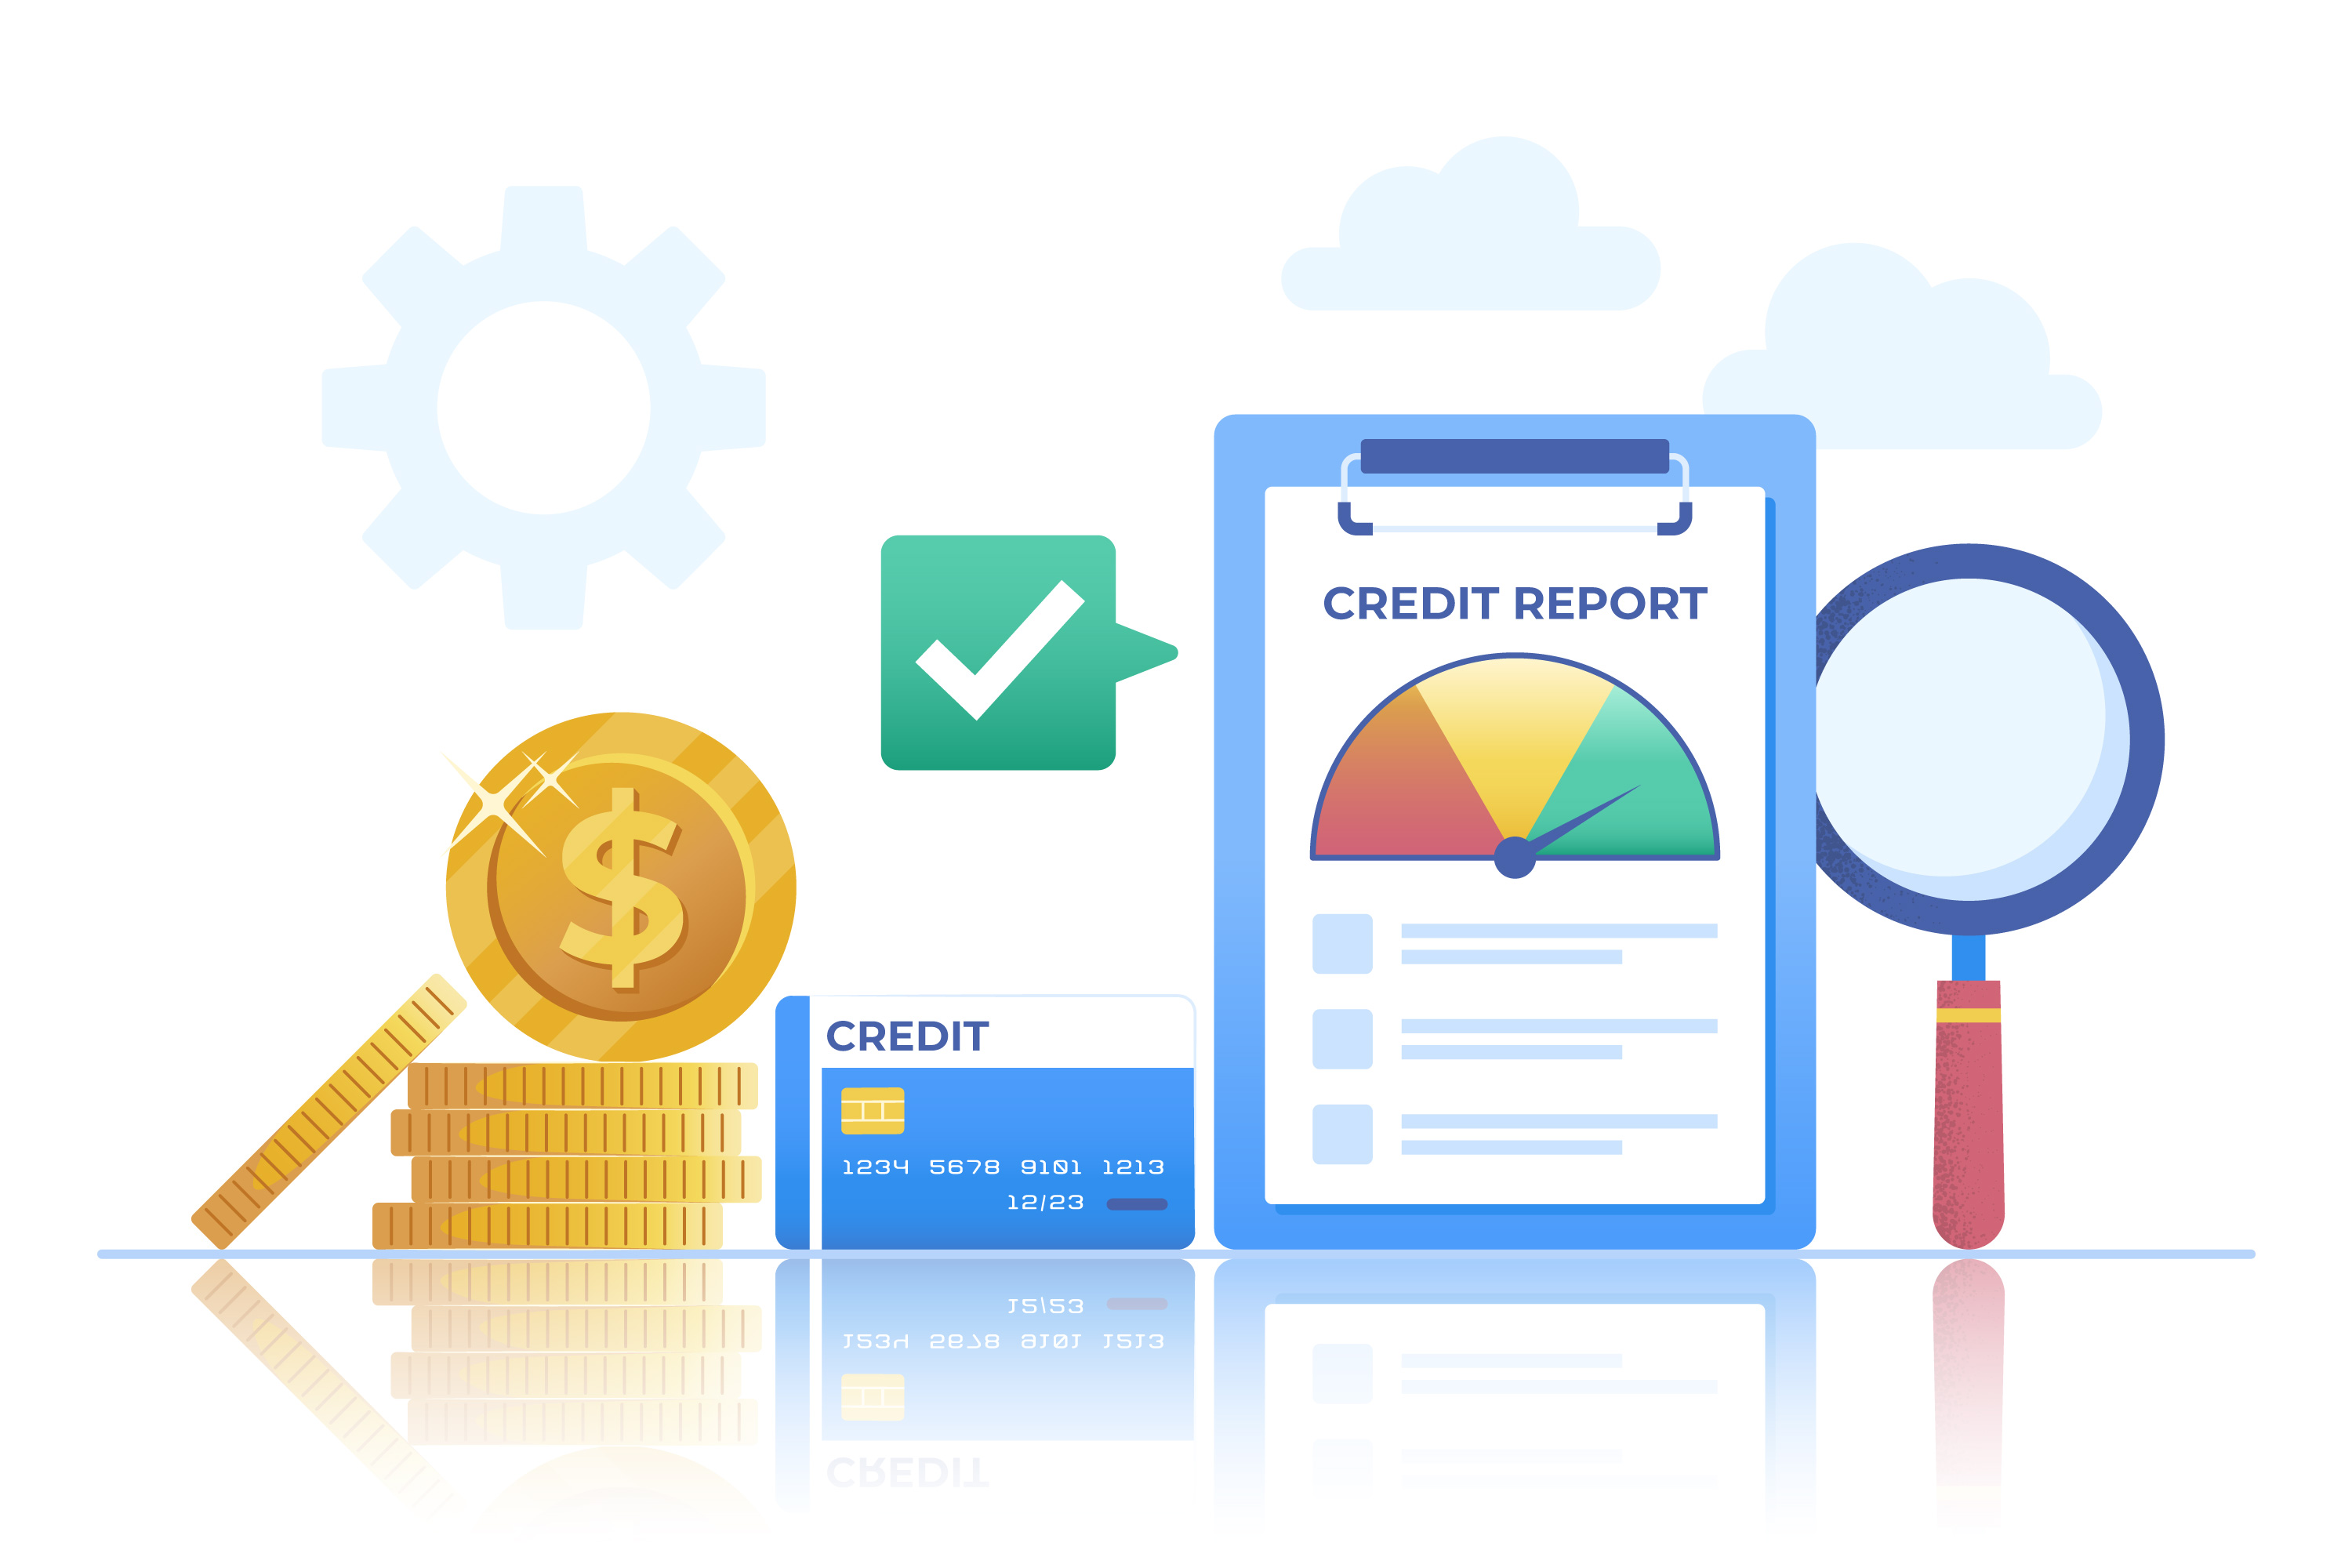 Credit Report with credit card